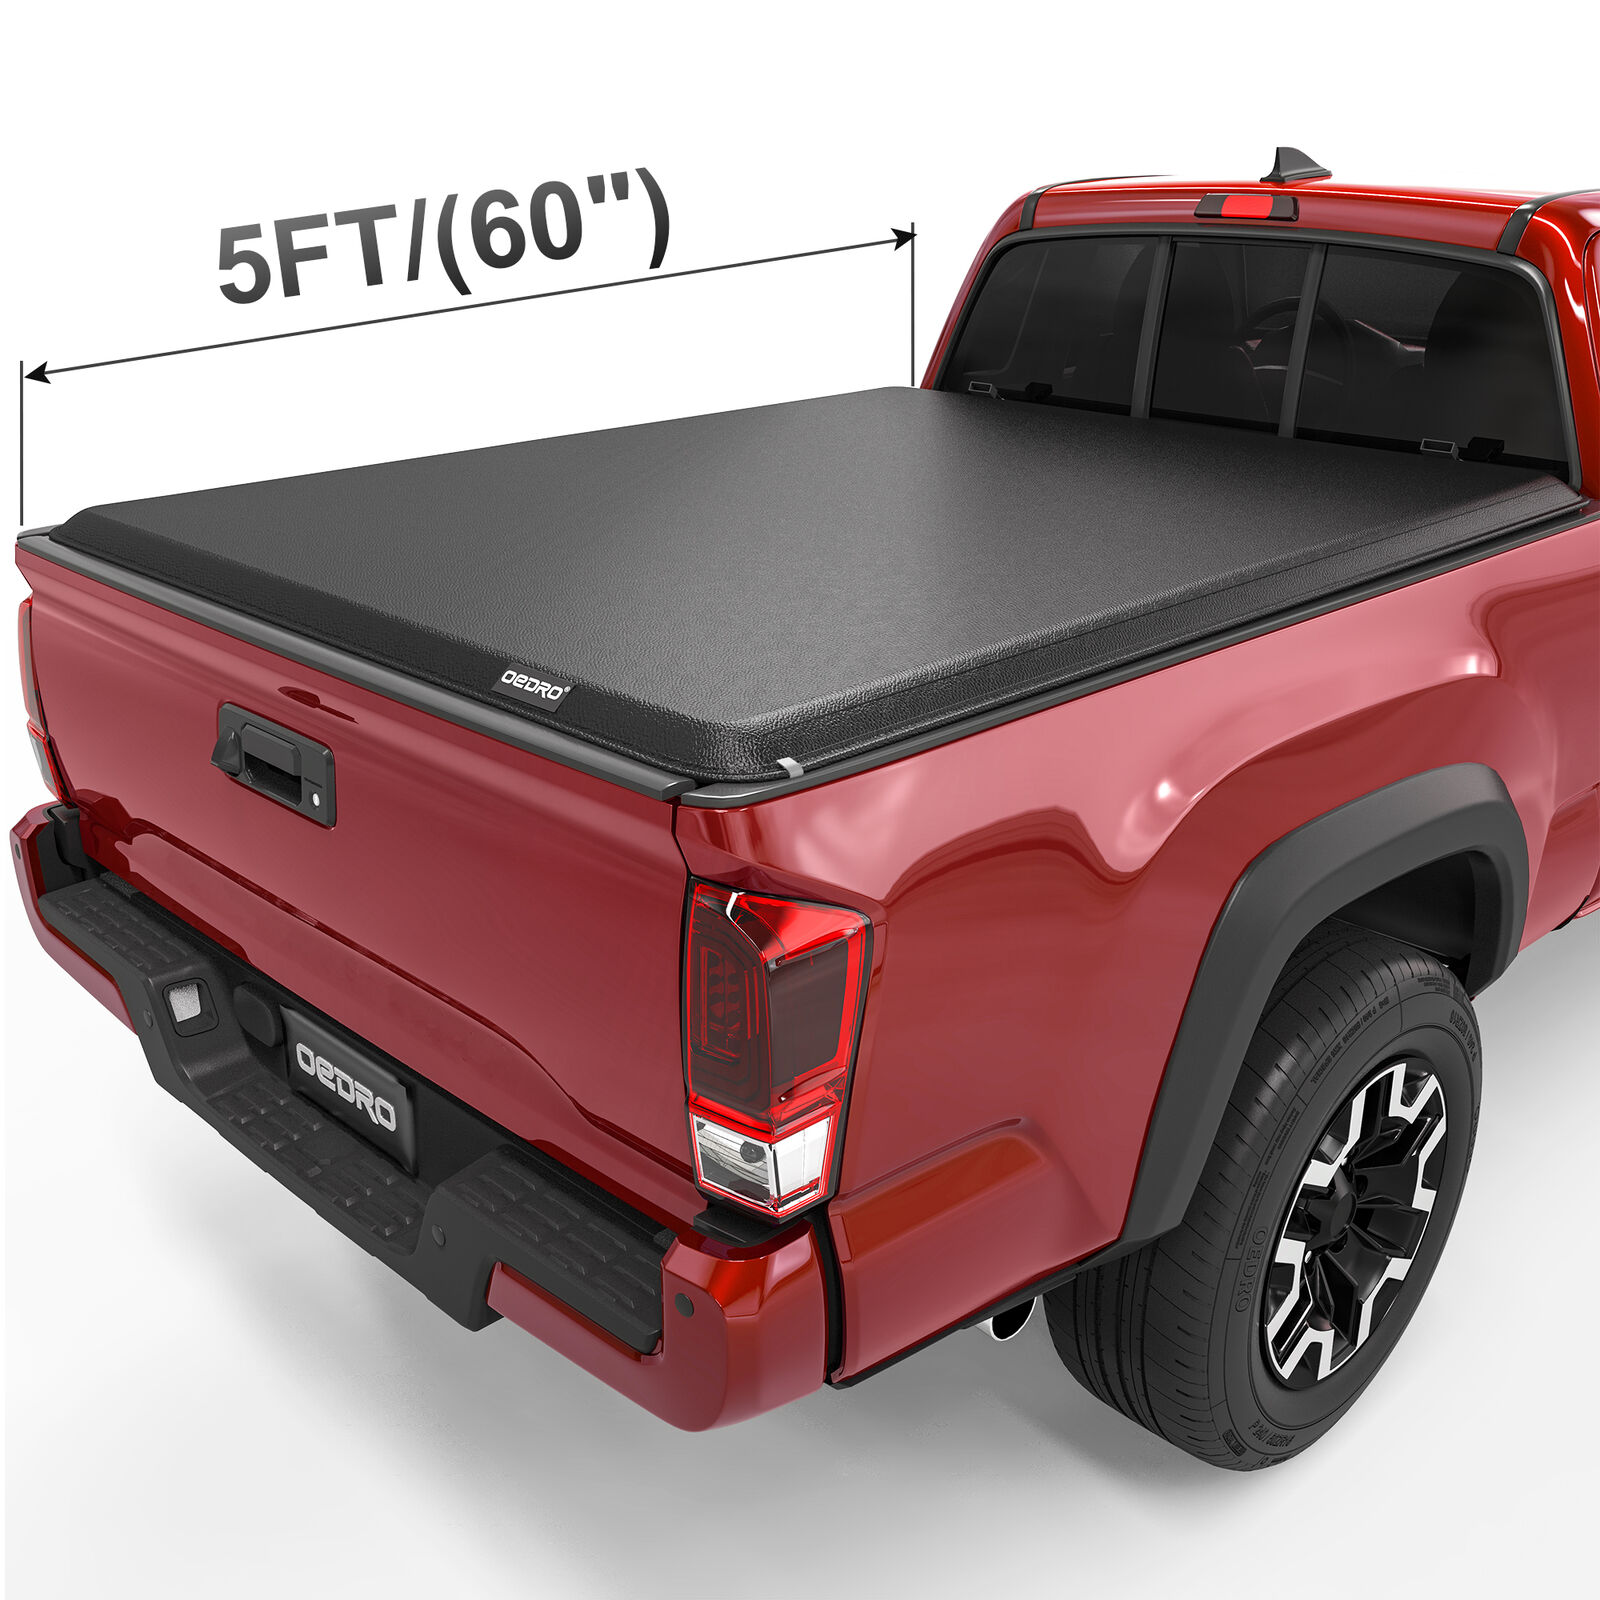 OEDRO 5FT Vinyl Roll Up Soft Truck Bed Tonneau Cover For 2005-2015 Toyota Tacoma